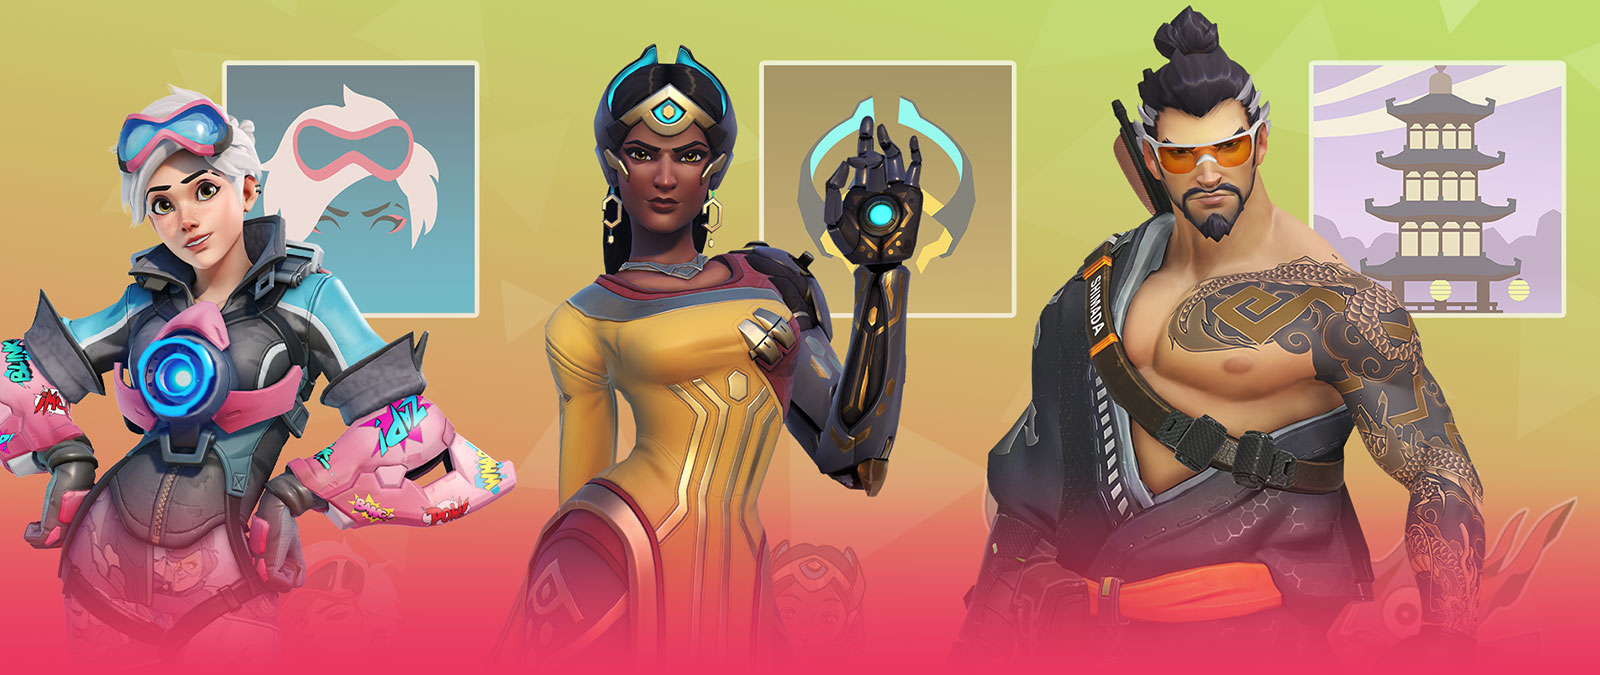 Tracer, Symmetra, and Hanzo pose together showing off new remixed skins.